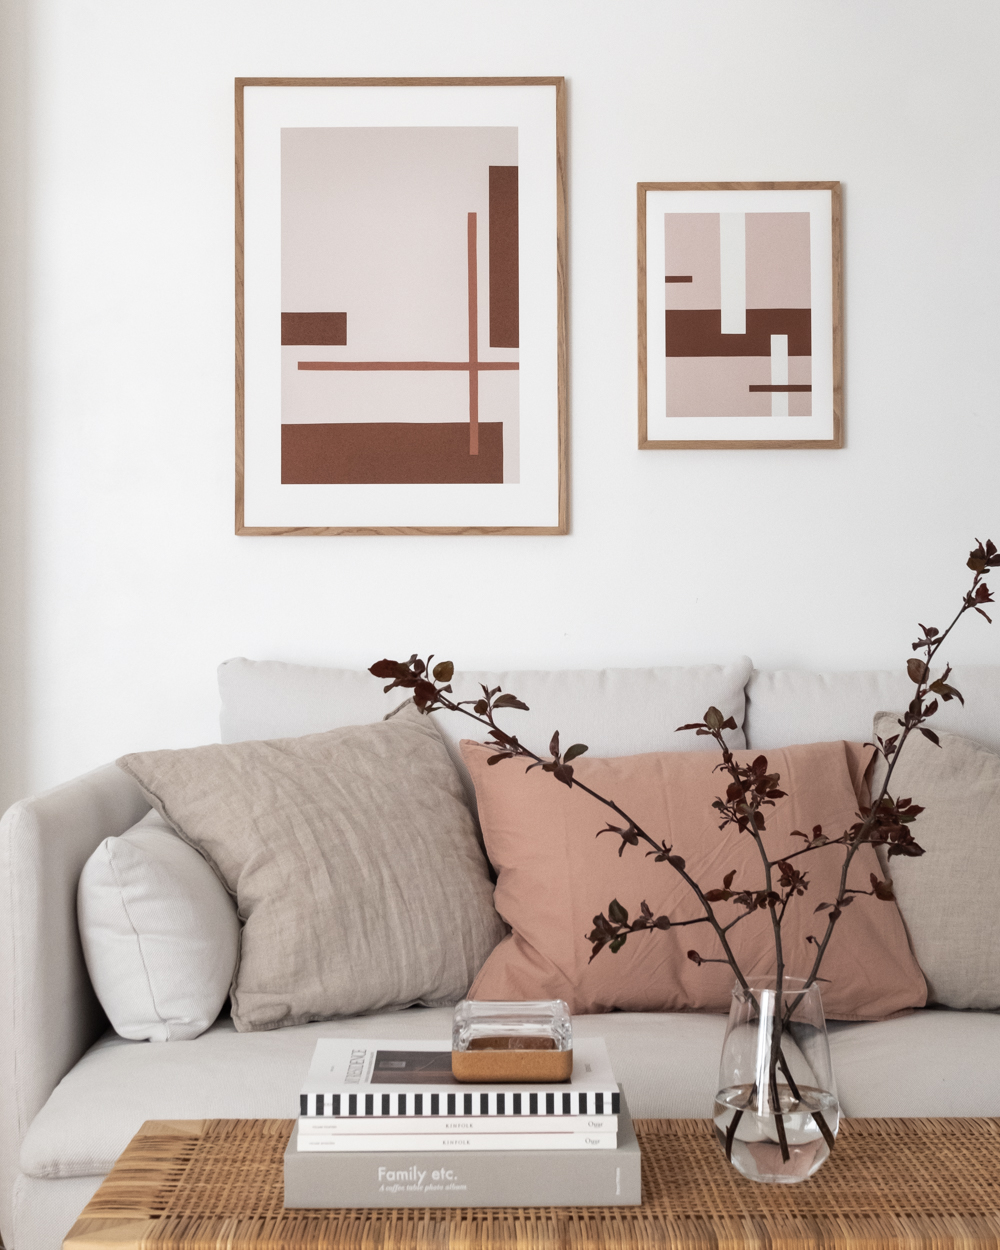 Anu Reinson's first collection of fine art prints is a reflection of her soft minimalist style